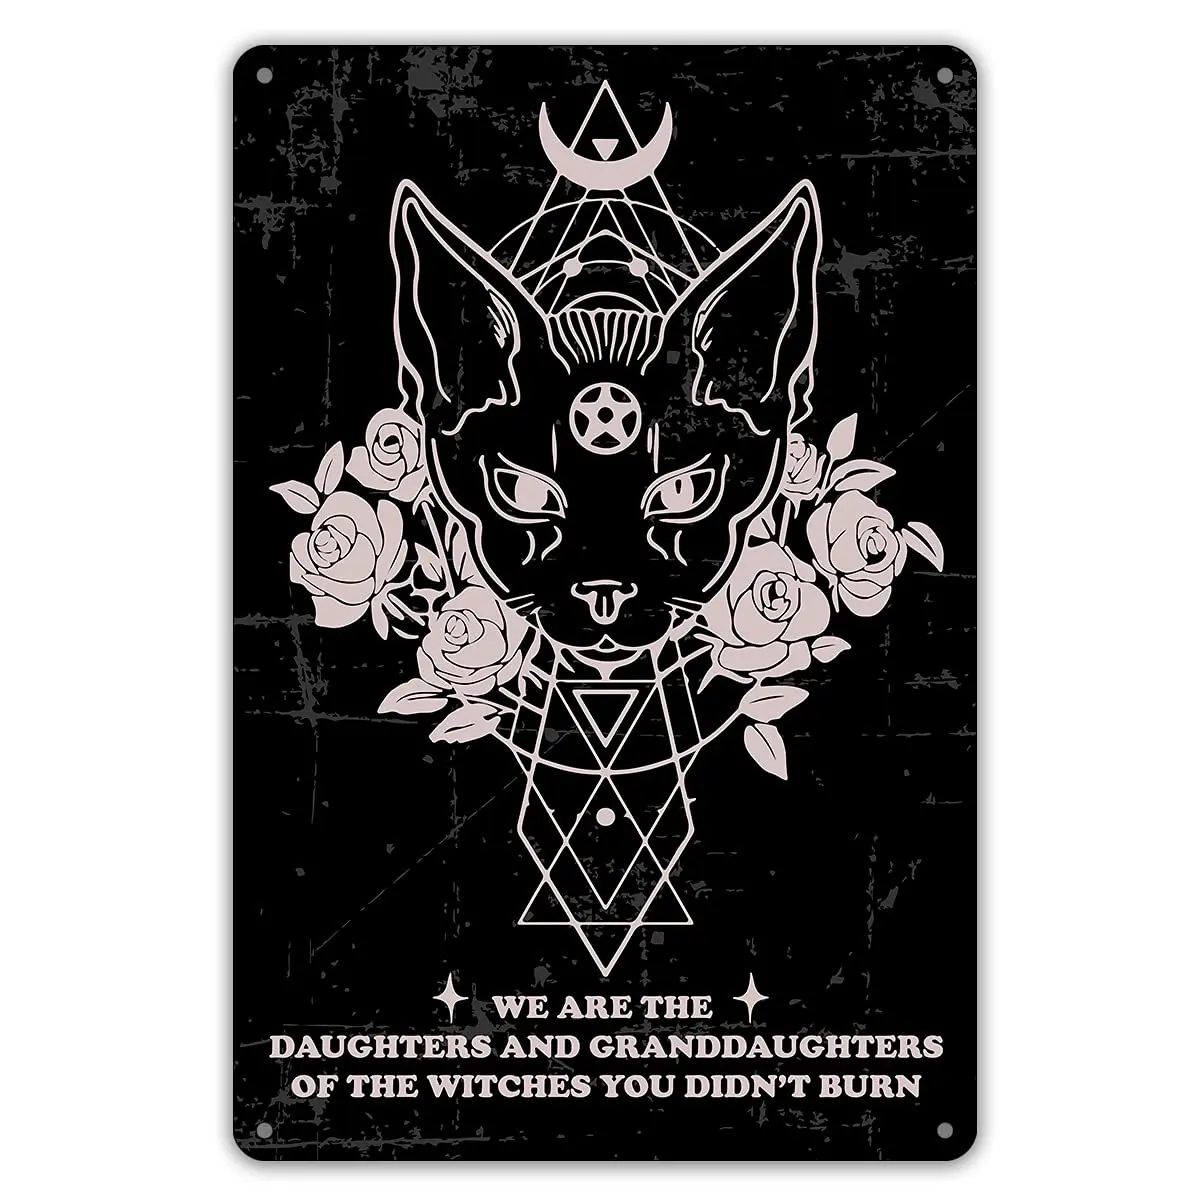 

Black Cat We are The Daughters and Granddaughters of The Witches You Didn’t Burn Metal Tin Sign Wall Decor Witches Signs